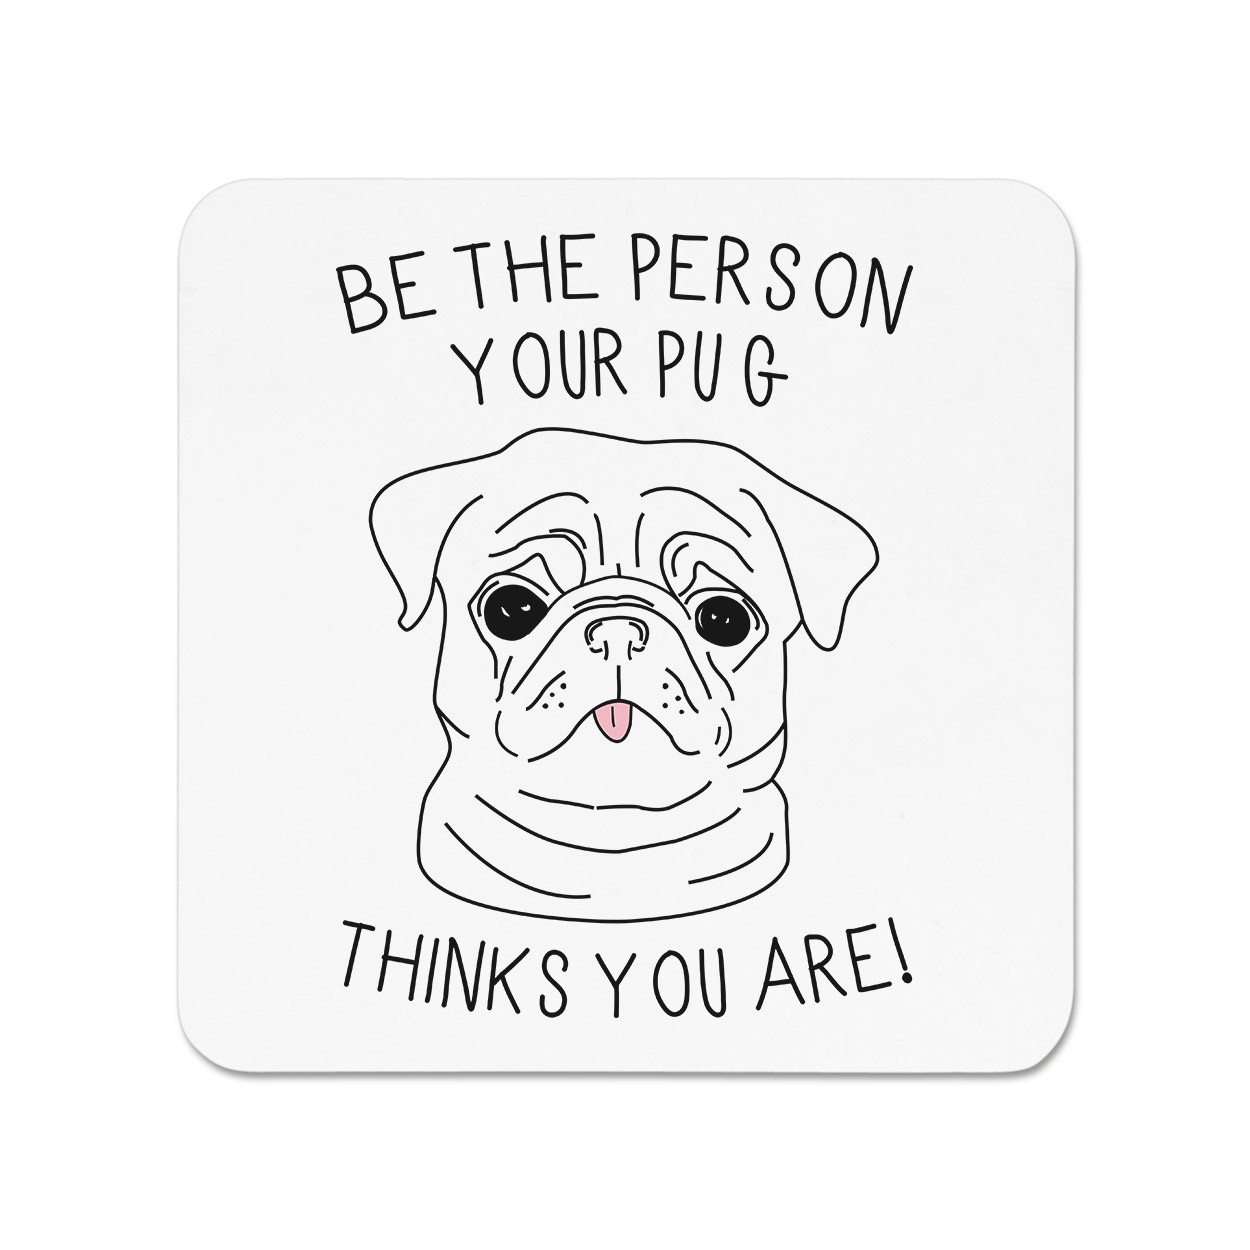 Be The Person Your Pug Thinks You Are Fridge Magnet